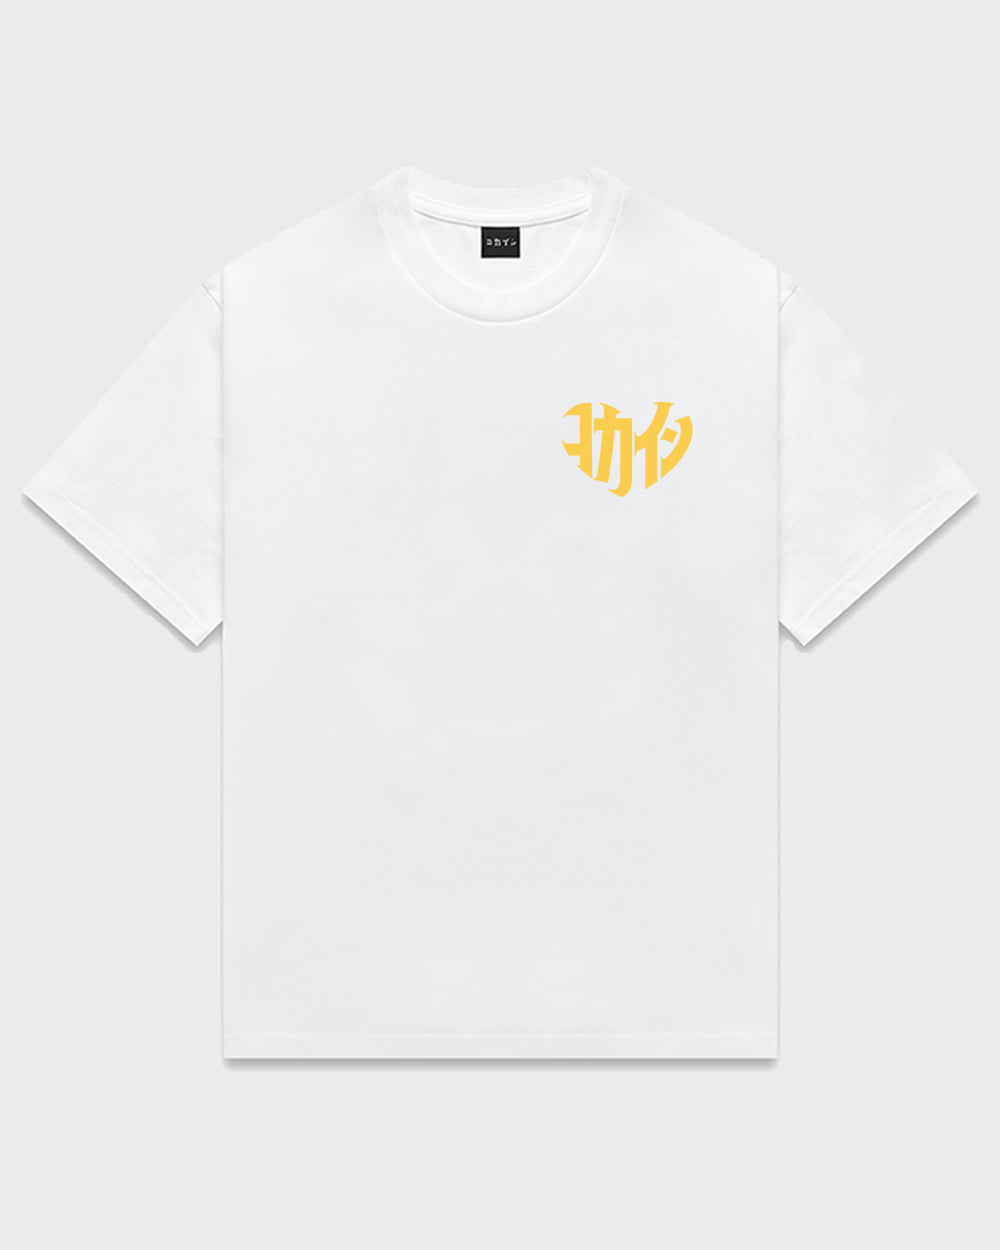 R34 @hypo_34 "Love Yours" T Shirt // White